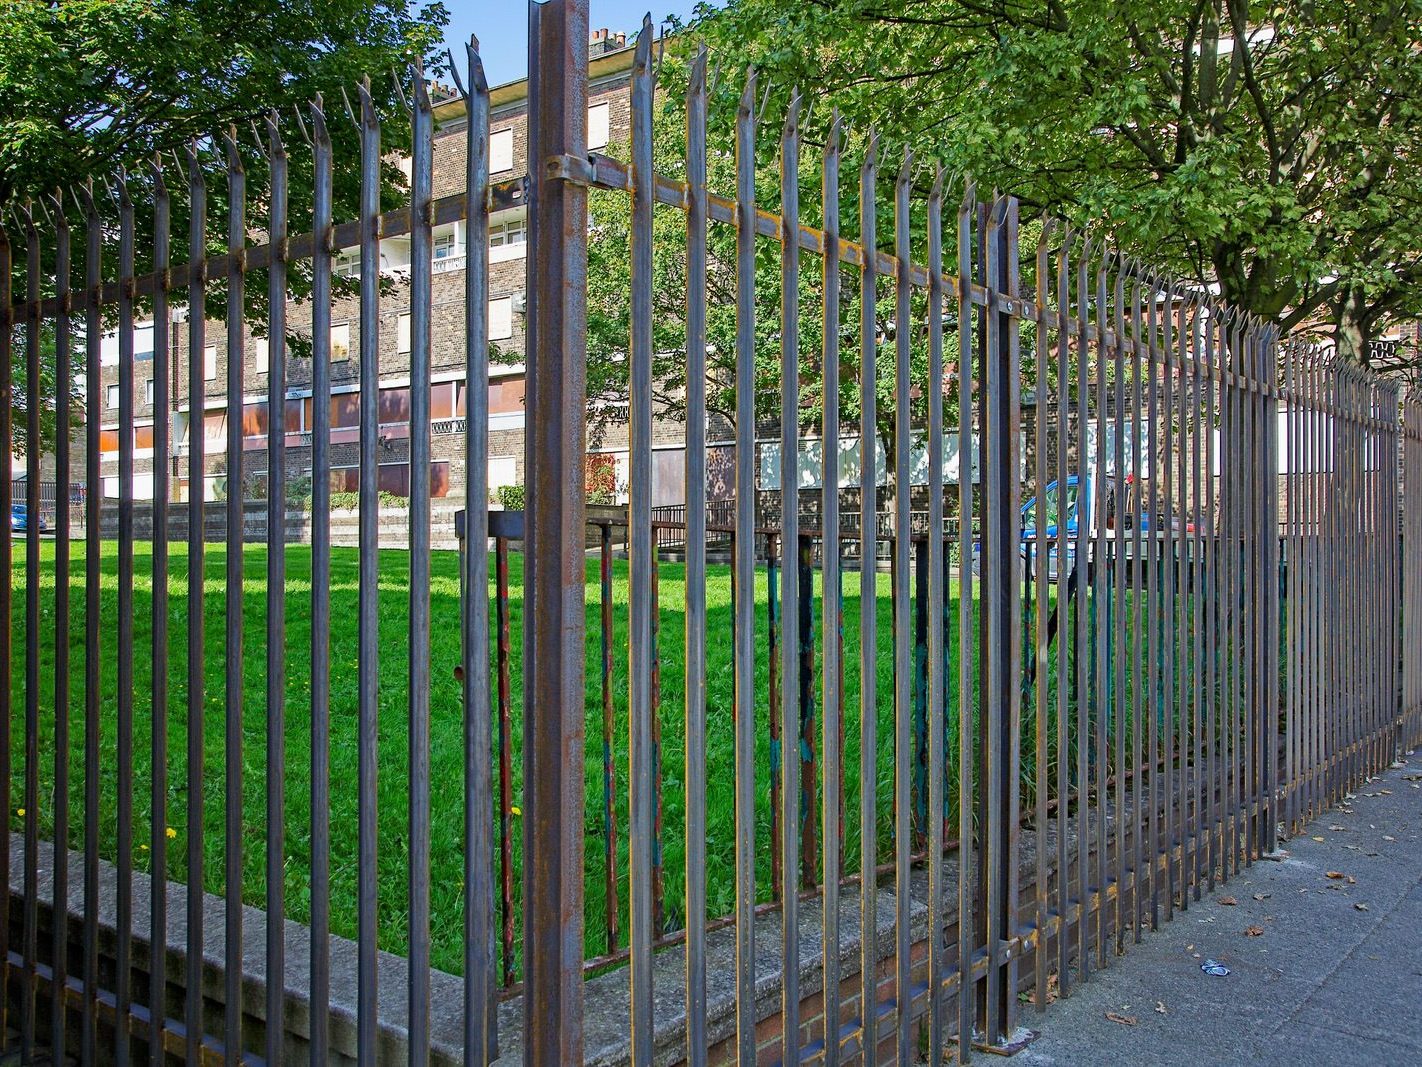 SECURITY FENCING BEING INSTALLED AROUND DORSET STREET FLATS [I DID NOT KNOW THAT THE COMPLEX WAS TO BE DEMOLISHED] 004